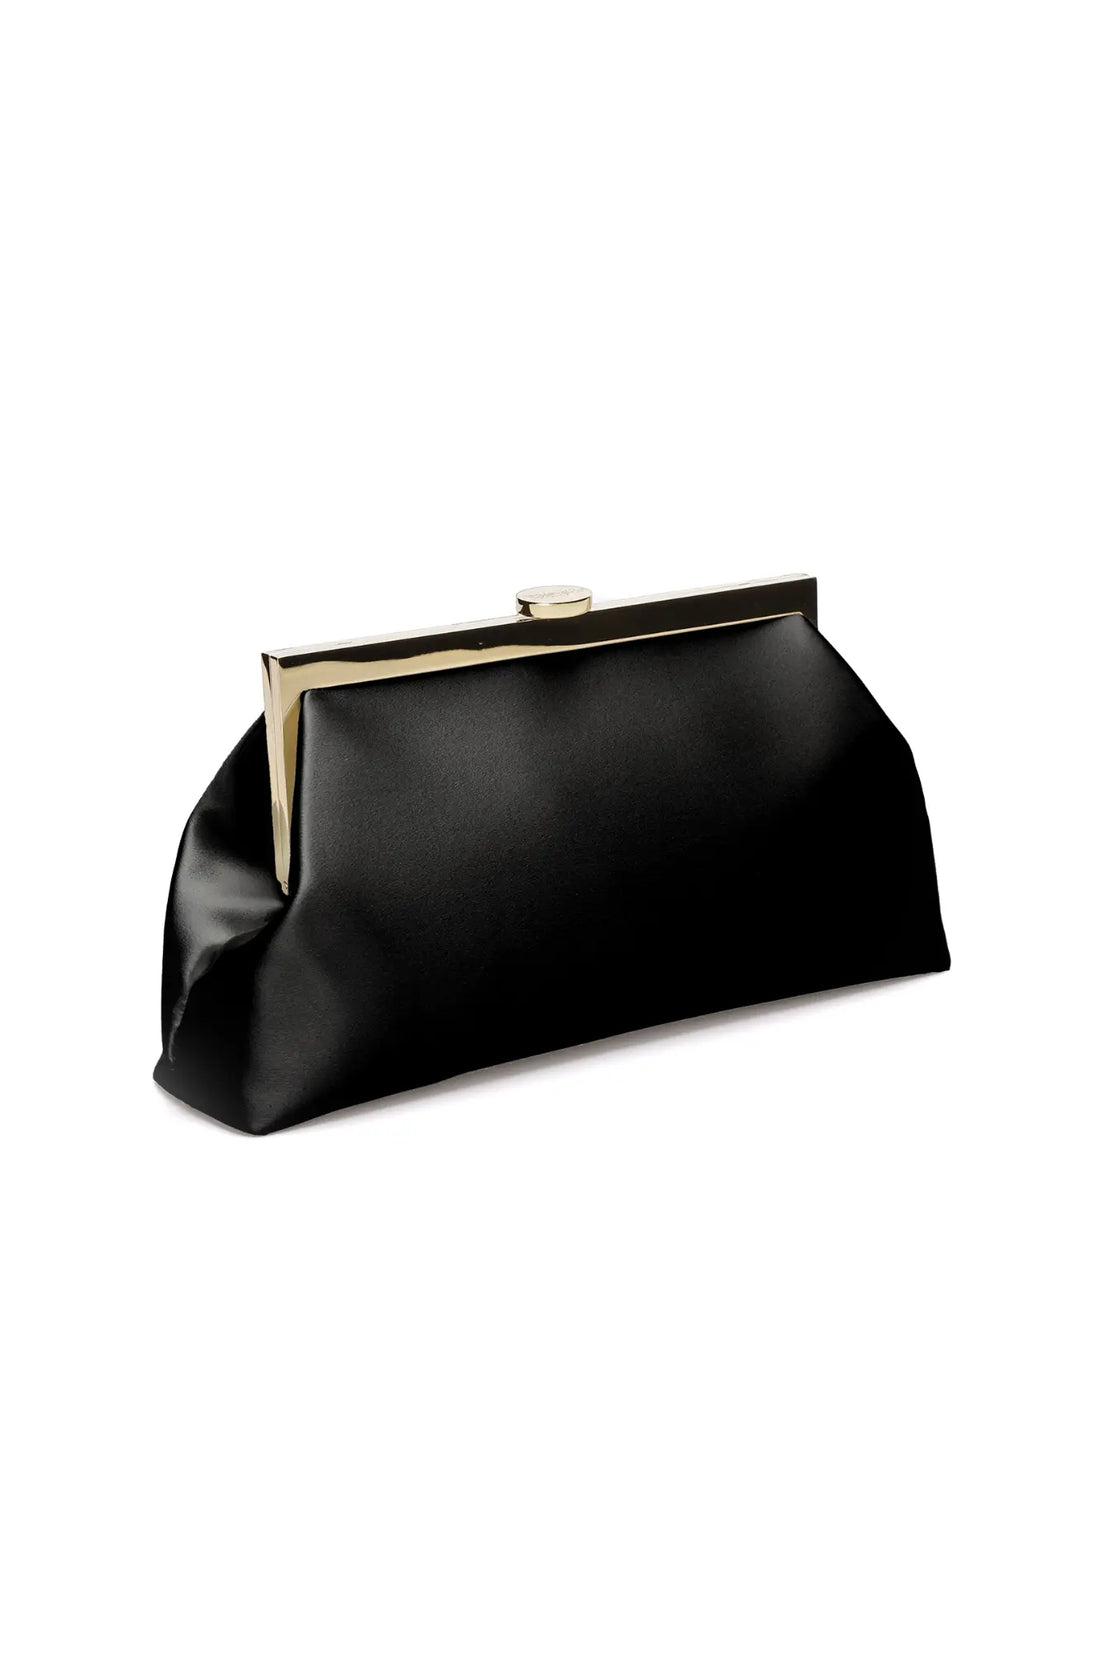 A black Rosa Clutch - Nera Black evening clutch with a metallic clasp on a white background by The Bella Rosa Collection.